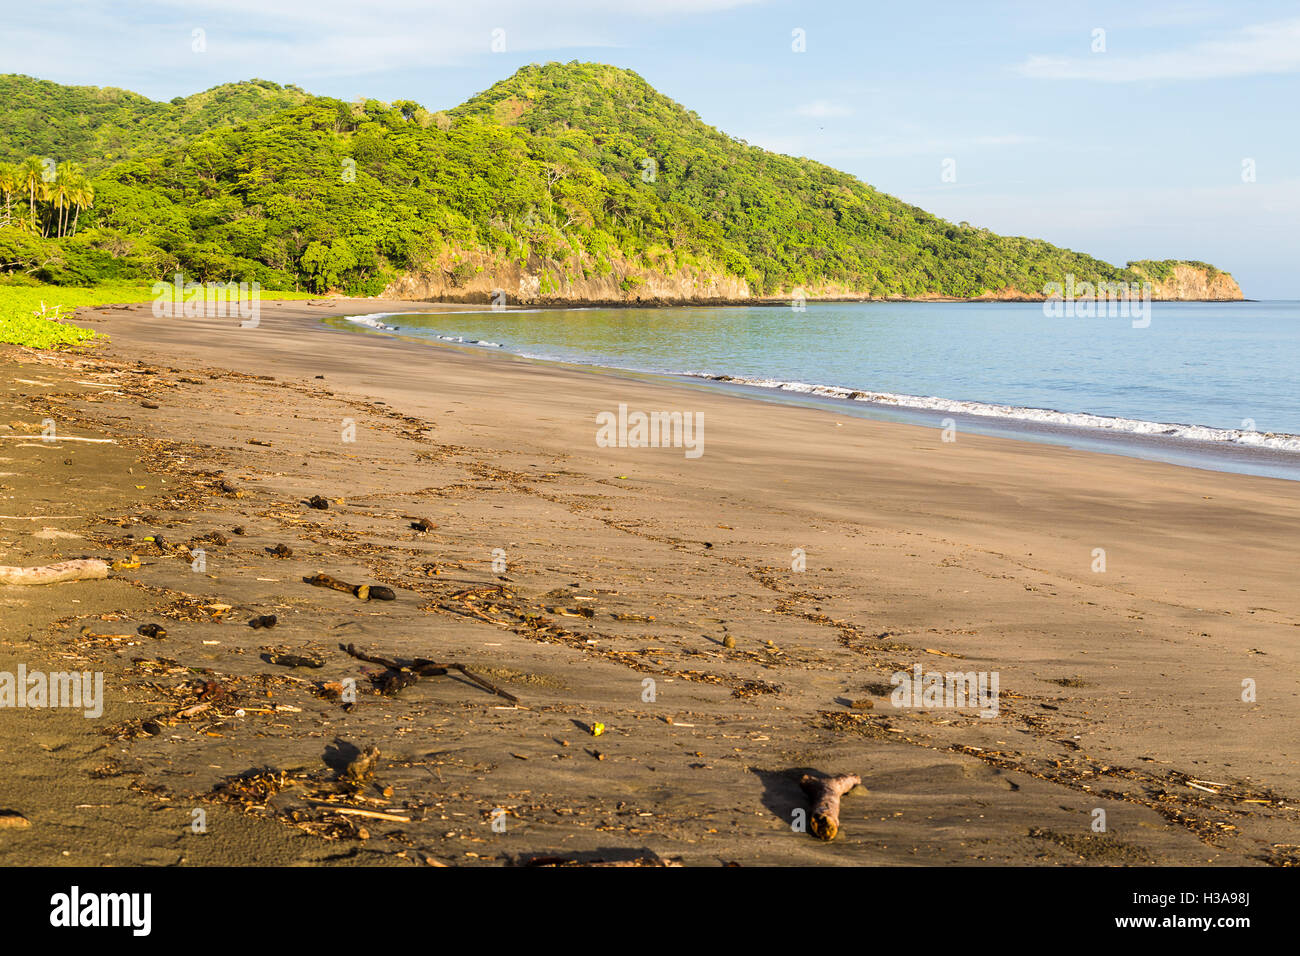 The starting place of my daily 6am walks before entering the dry forest to find monkeys in Guanacaste, Costa Rica. Stock Photo